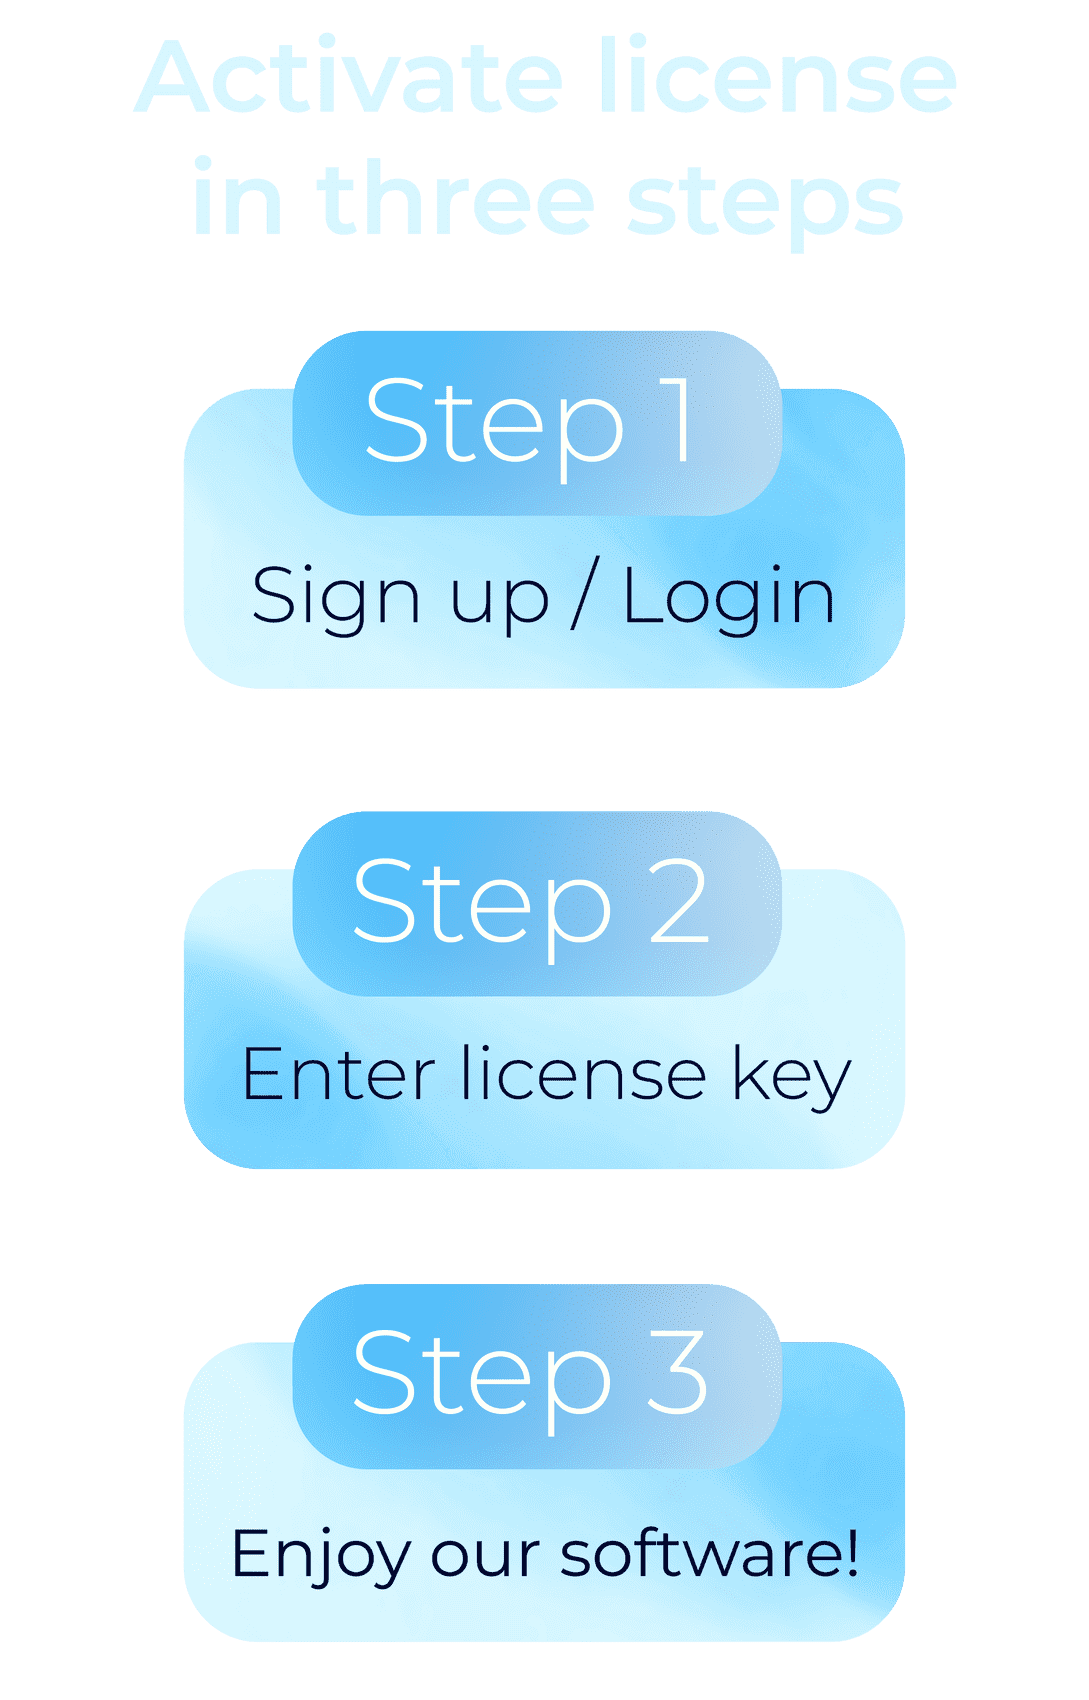 Activate lciense in three steps. Step 1: Sign up / login. Step 2; Enter the license key; Step 3: Enjoy our software!